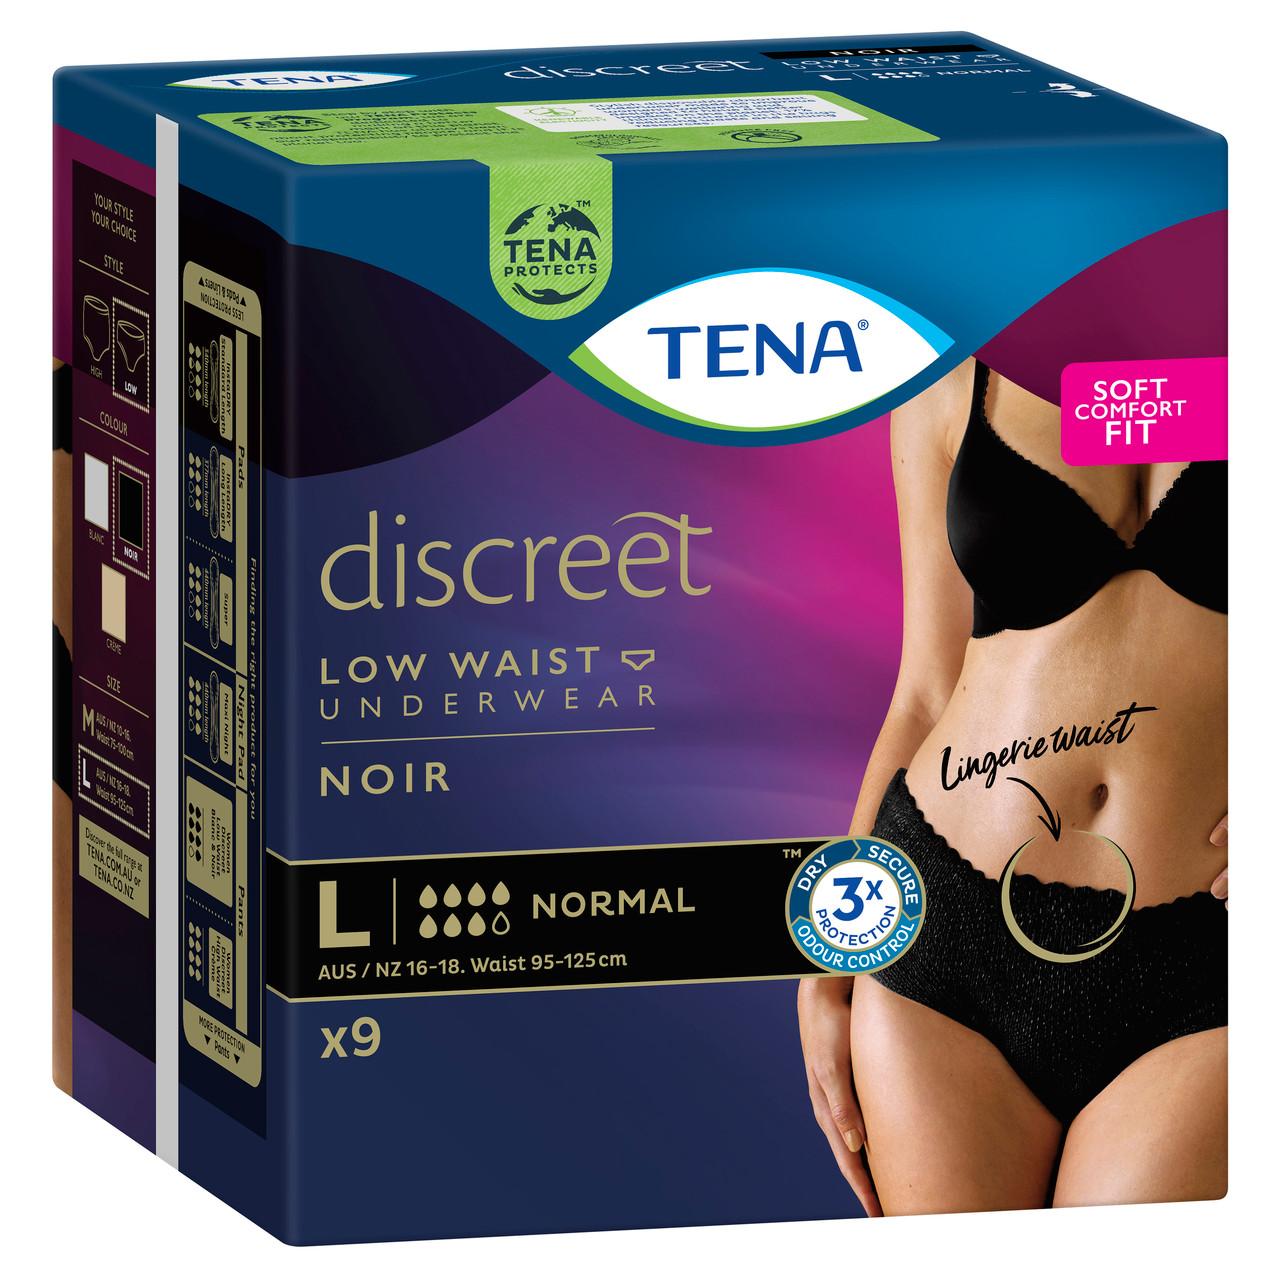 TENA® - 10 protective underwear discreet for women - Large Size Medium  Packaging 4 packs of 12 units